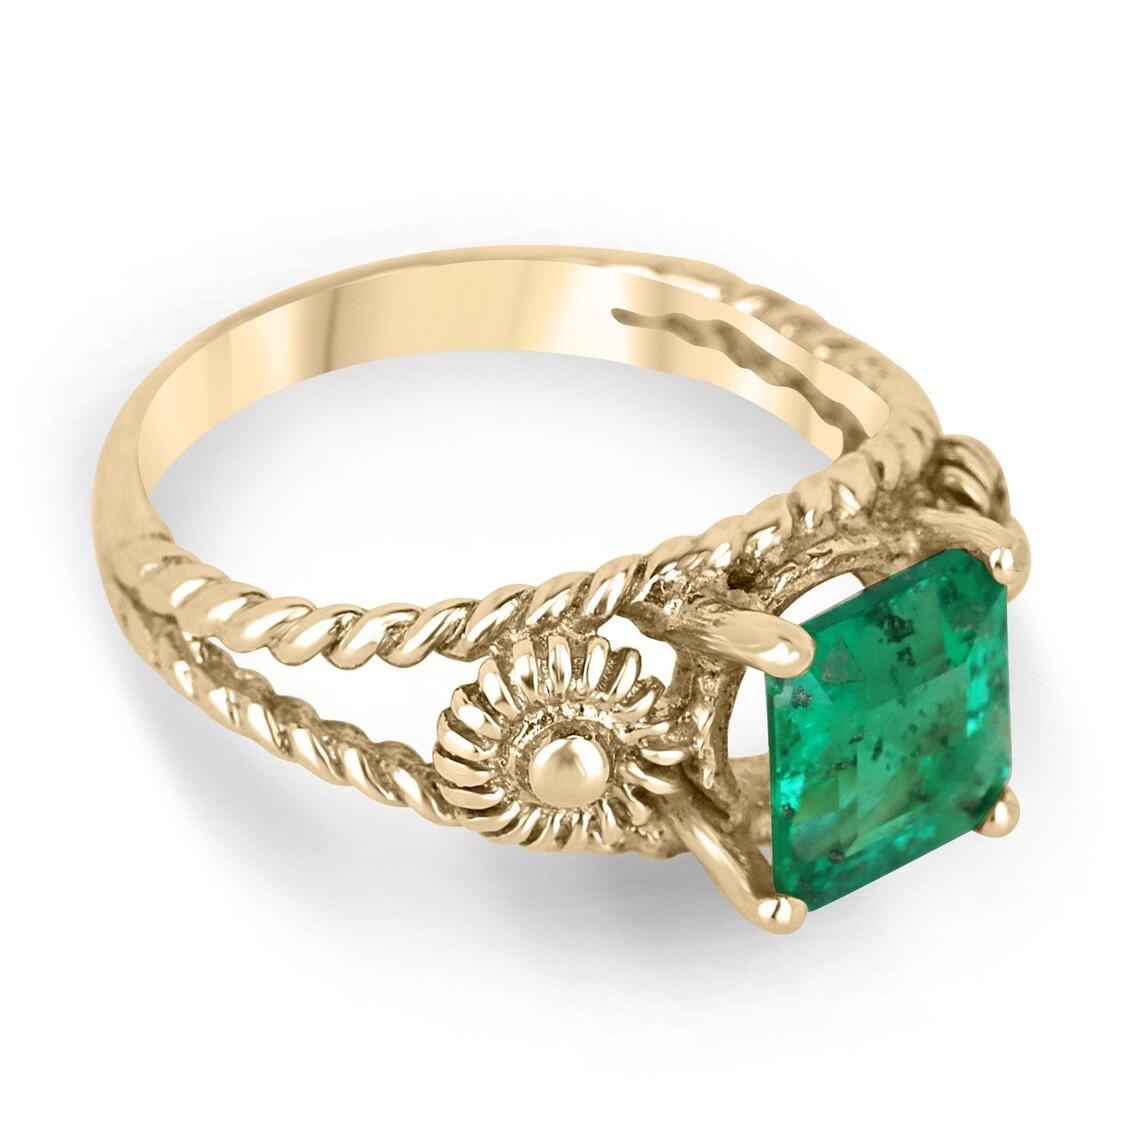 The solitaire emerald ring is a stunning piece of jewelry that is sure to catch the eye of anyone who sees it. The emerald is a rich, vivid green color and is set in a classic four-prong setting, which allows the stone to be the star of the show.